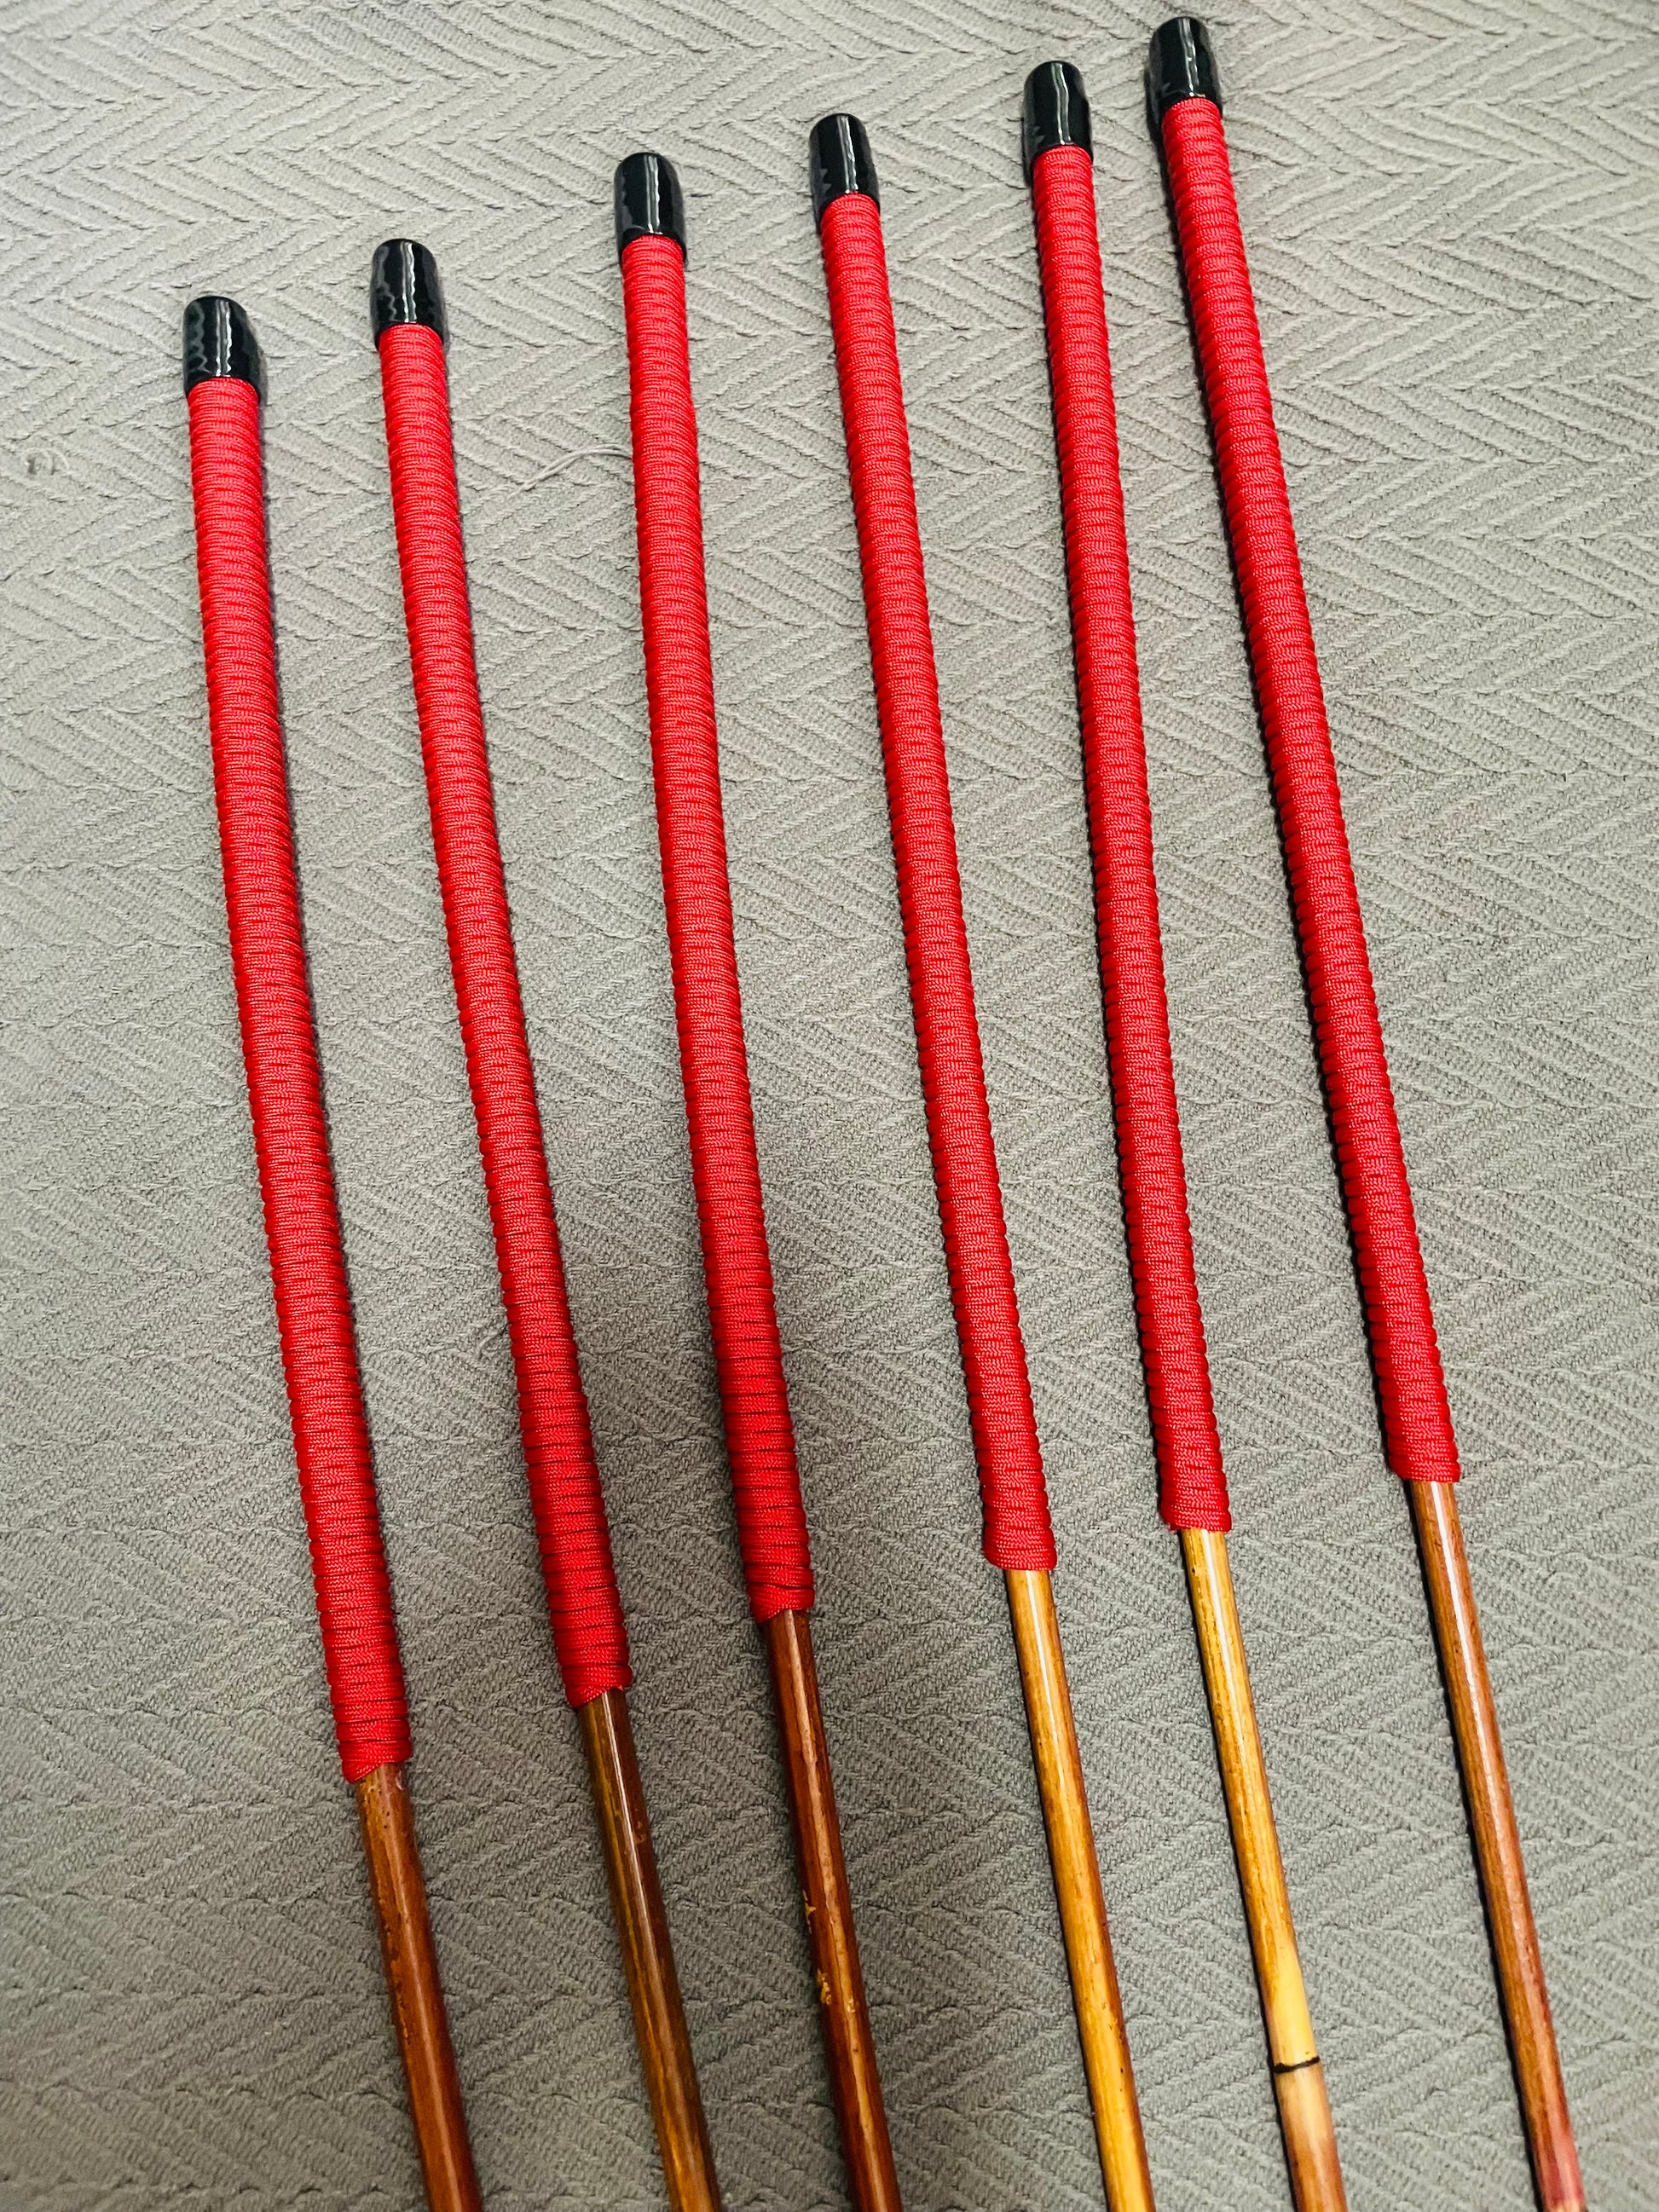 Smoked Dragon Canes SELECT Six / Dark Dragon Canes - 95 to 98 cms Length - Imperial Red Paracord Handles - Englishvice Canes